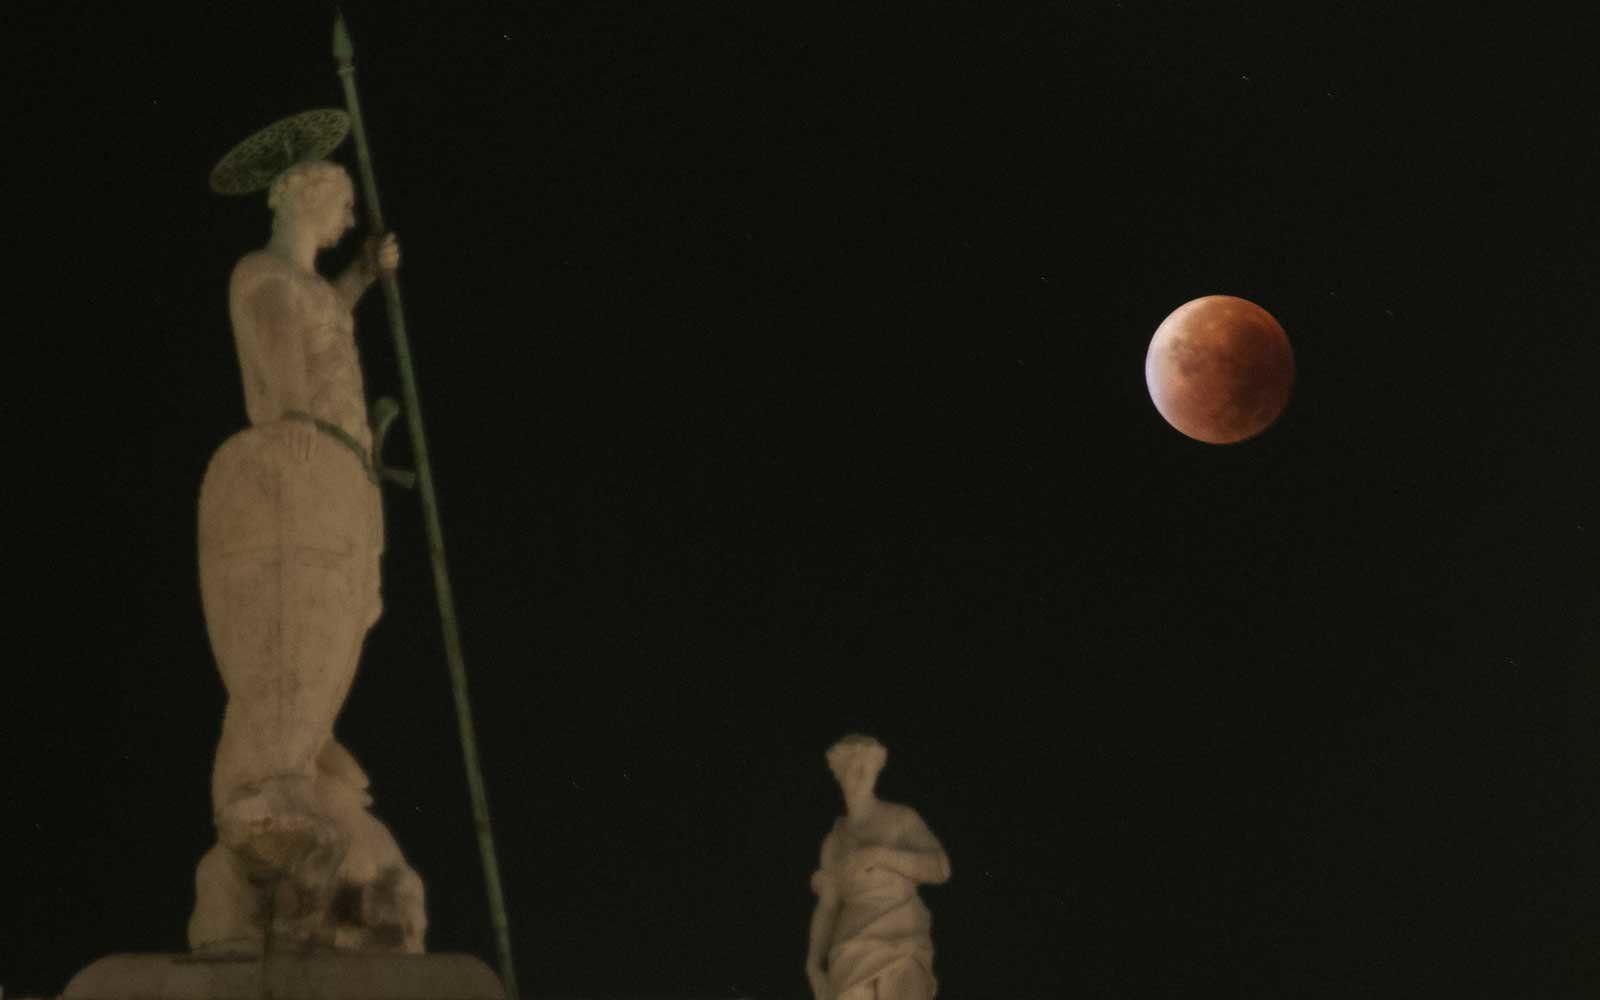 Super Blue Blood Moon Eclipse Occurring Jan 31: How To See It